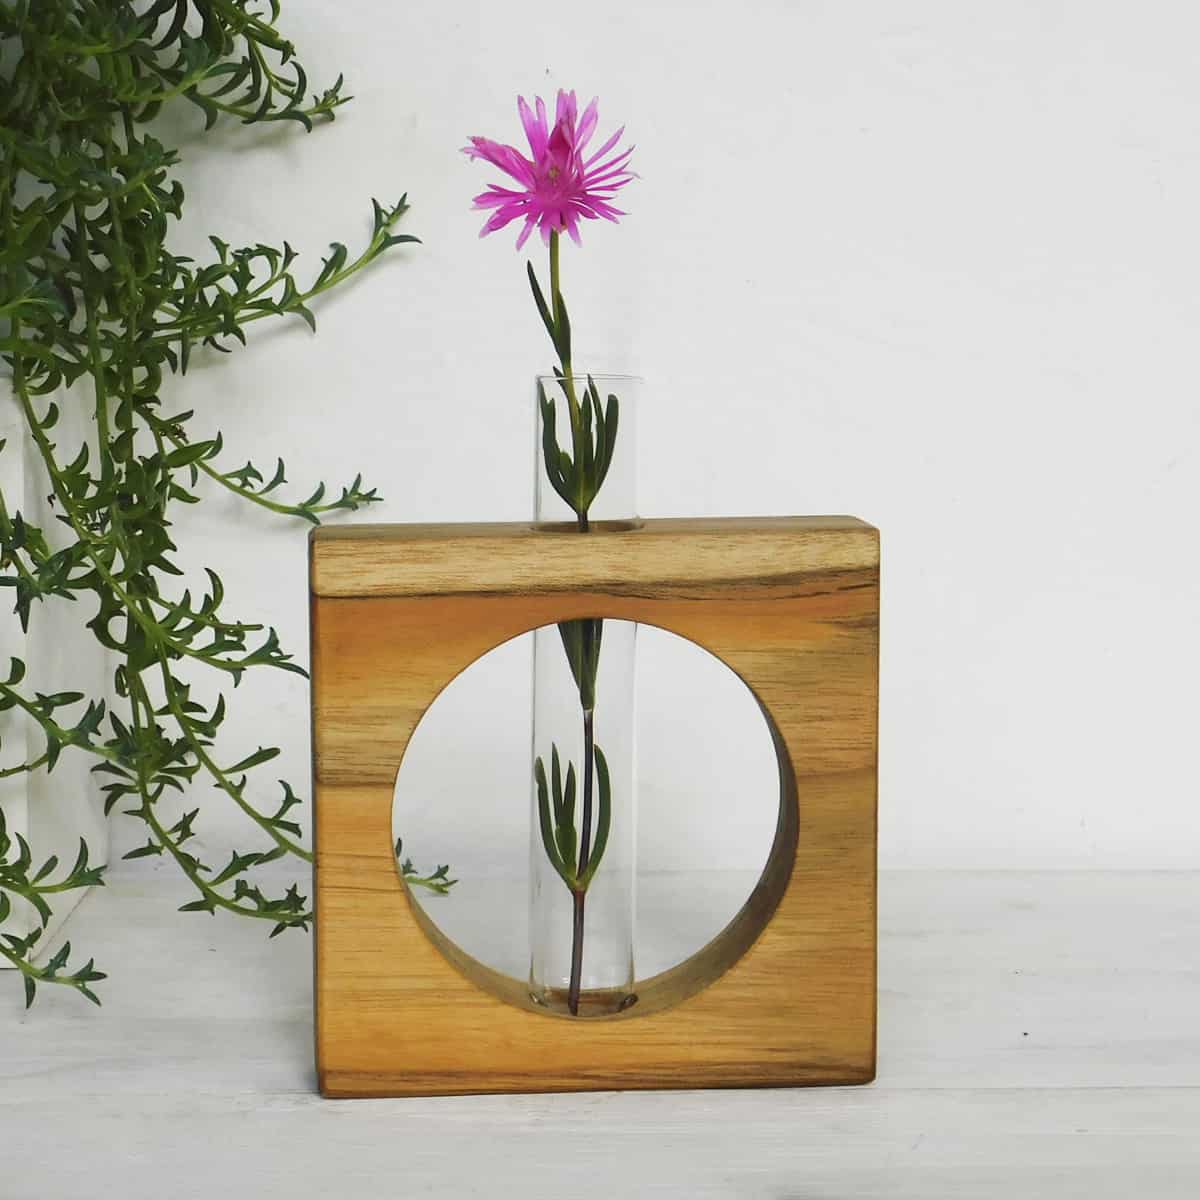  glass tube flower vase with a pink flower supported by a square wooden frame with a circular cutout